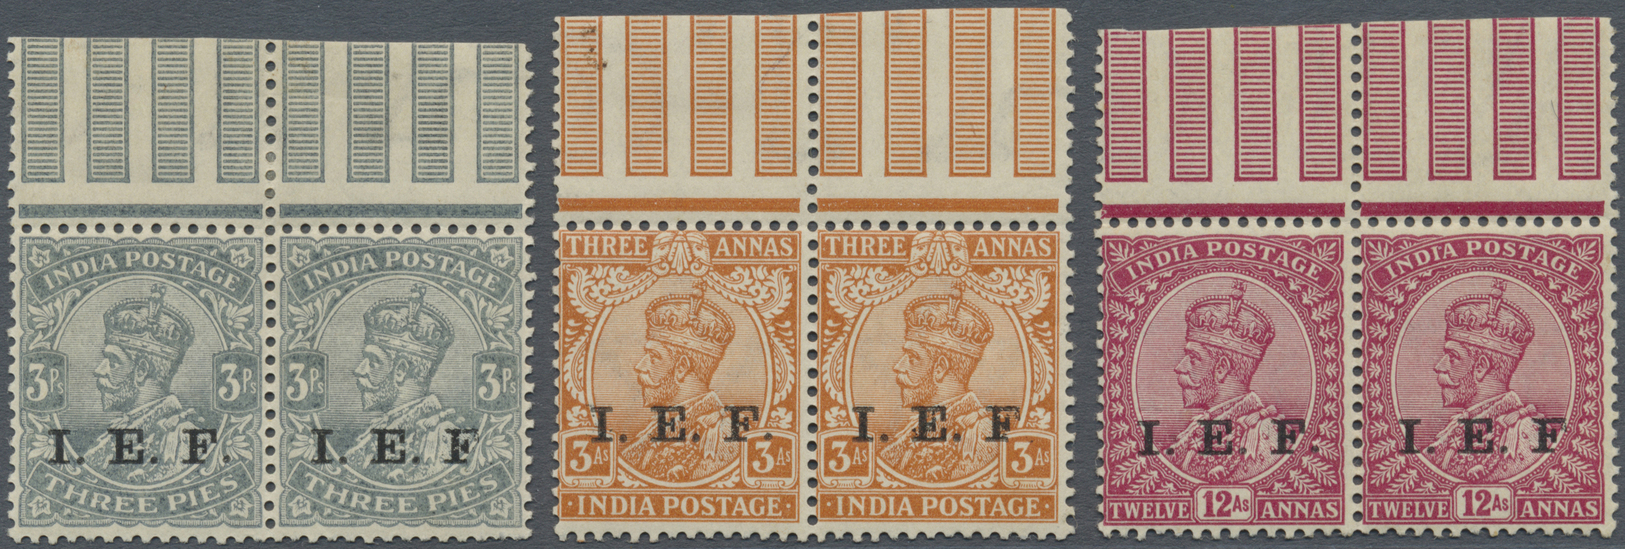 ** Indien - Feldpost: 1911 I.E.F.: Three Top Gutter Marginal Pairs Of 3p., 3a. And 12a. With Right Hand Stamp Showing 'a - Military Service Stamp